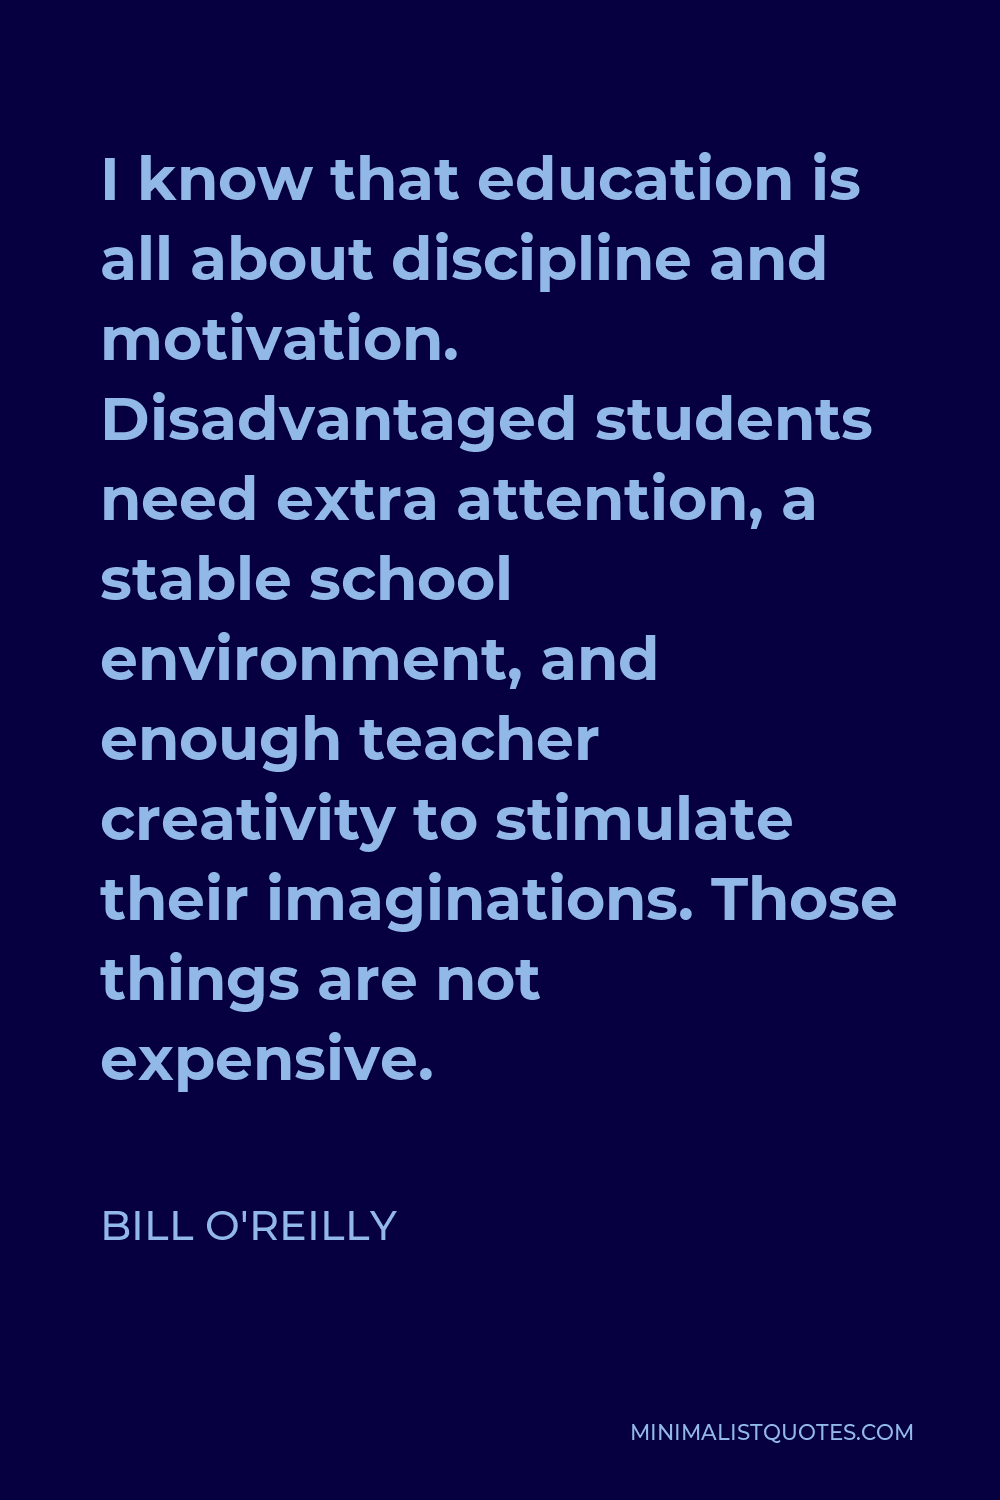 Bill O'Reilly Quote - I know that education is all about discipline and motivation. Disadvantaged students need extra attention, a stable school environment, and enough teacher creativity to stimulate their imaginations. Those things are not expensive.